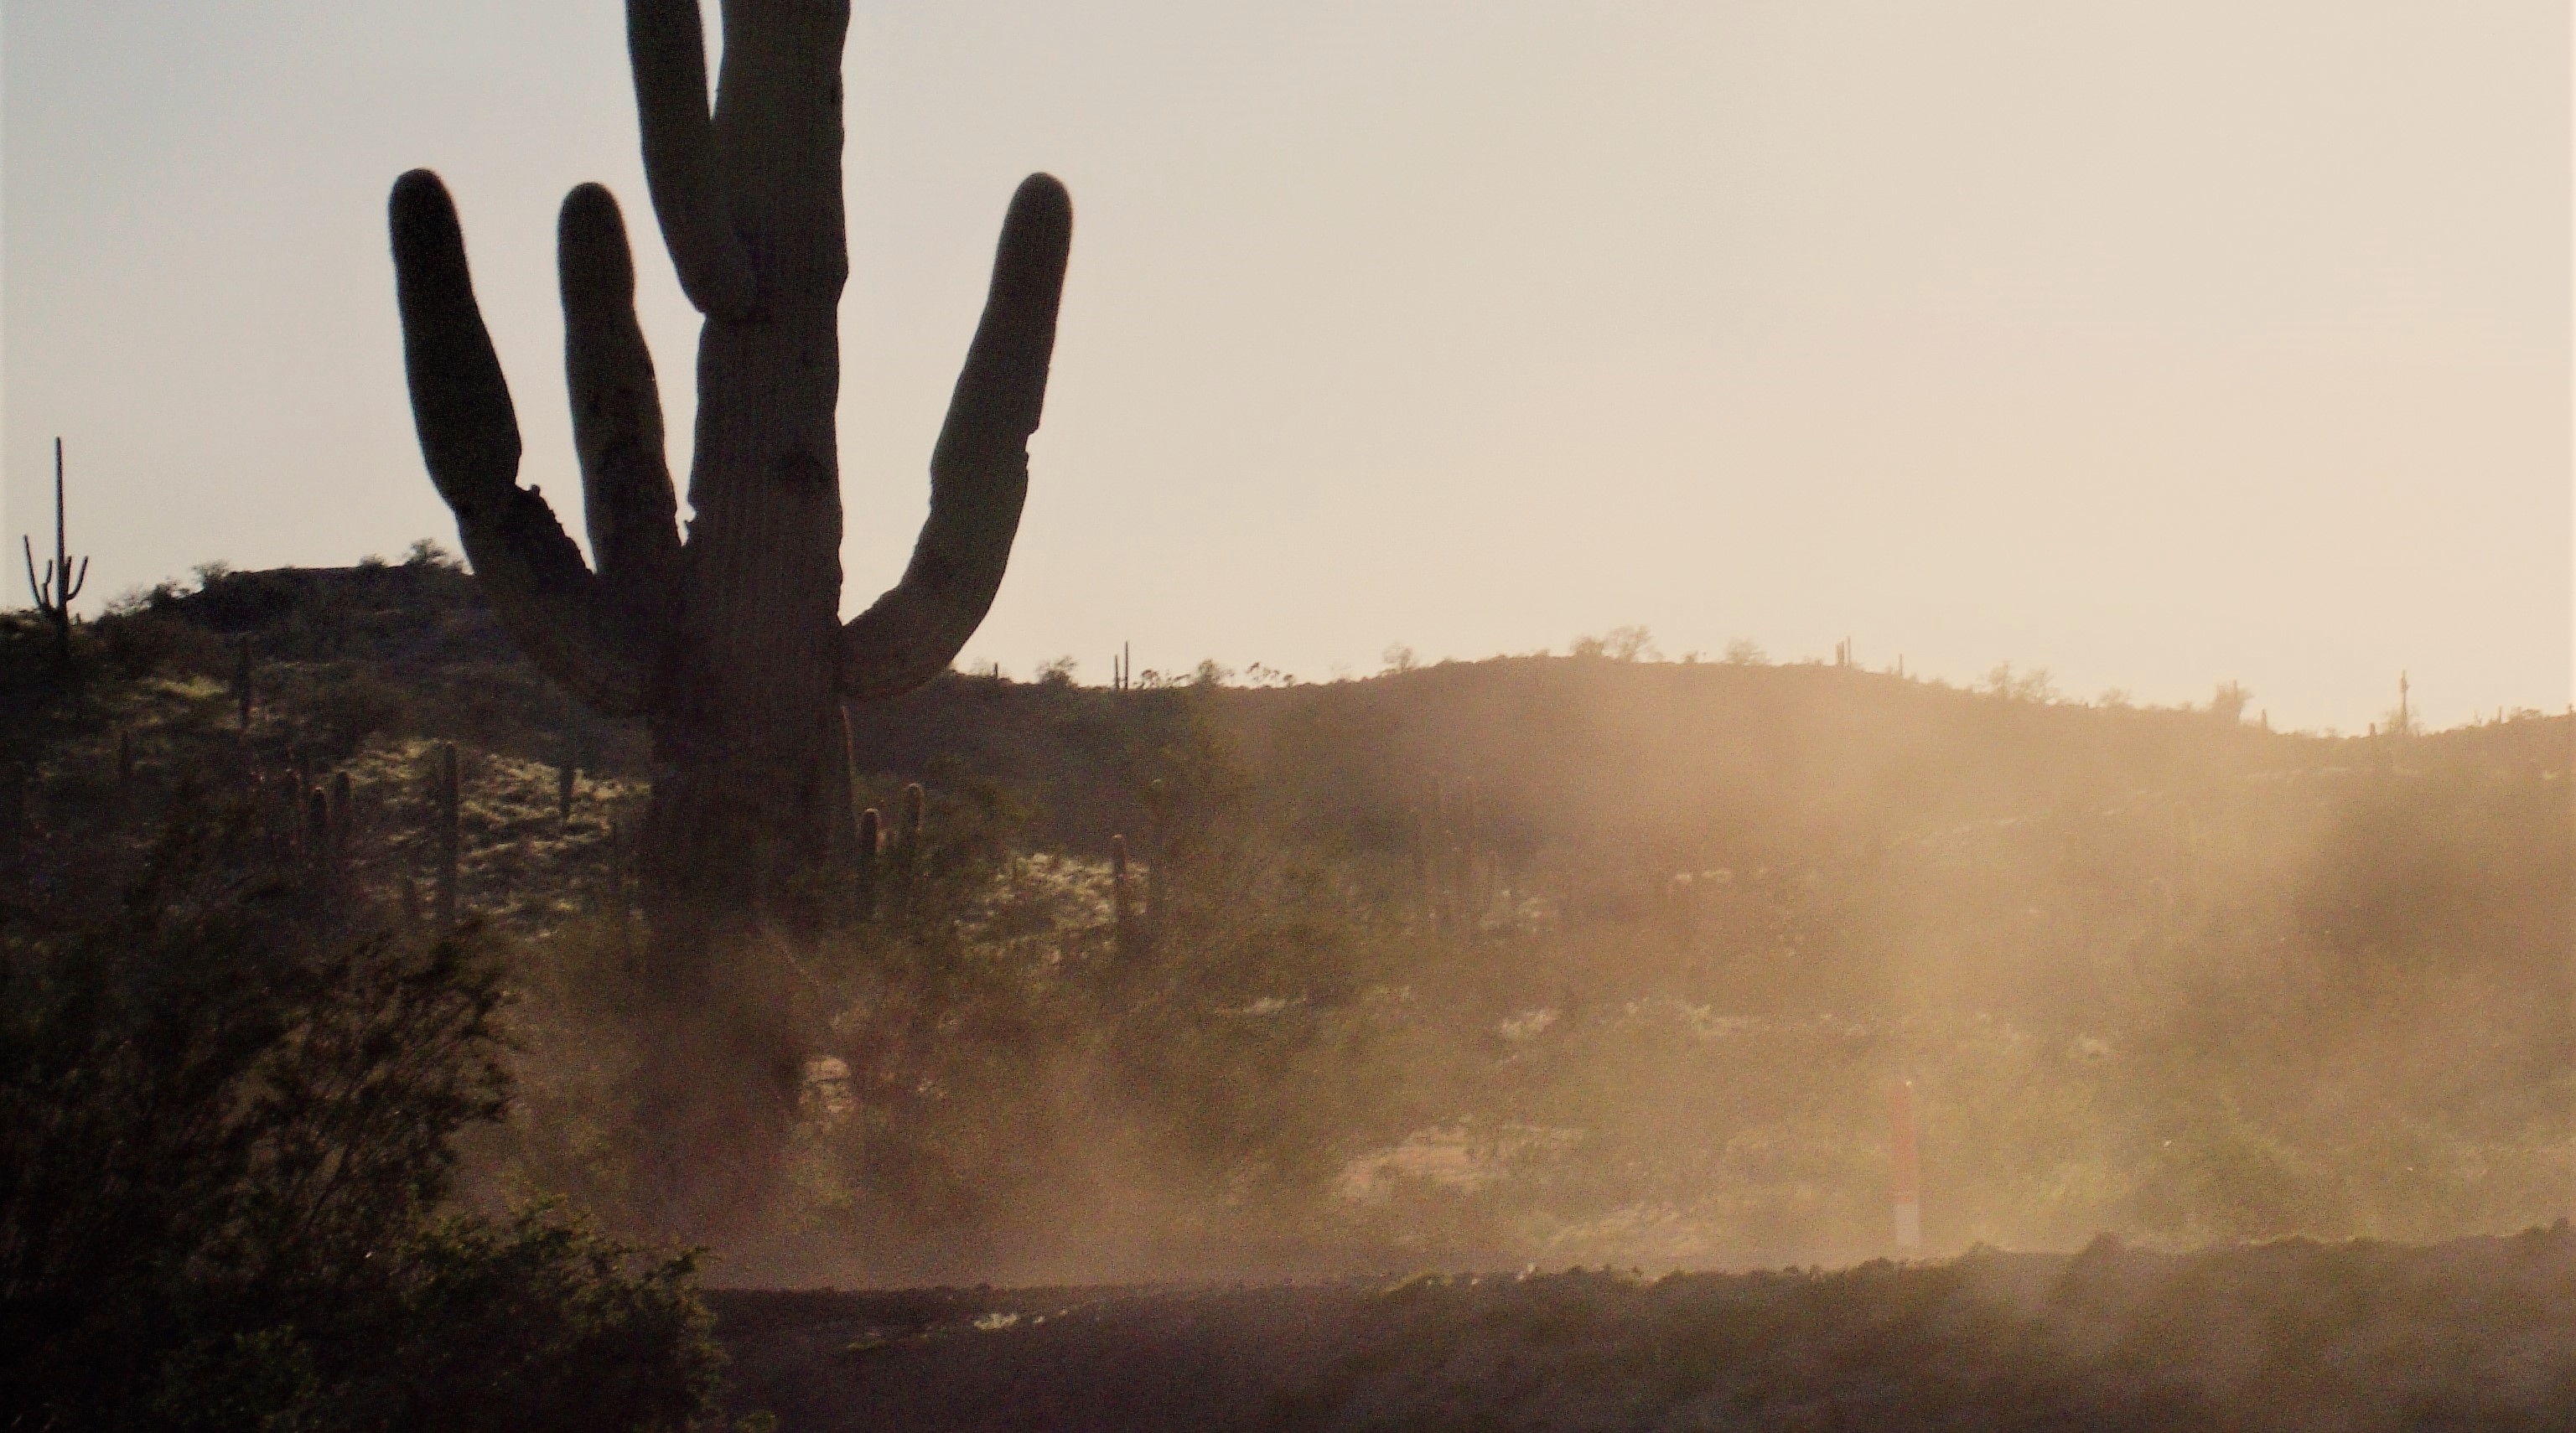 dust swirling around a cactus in a desert